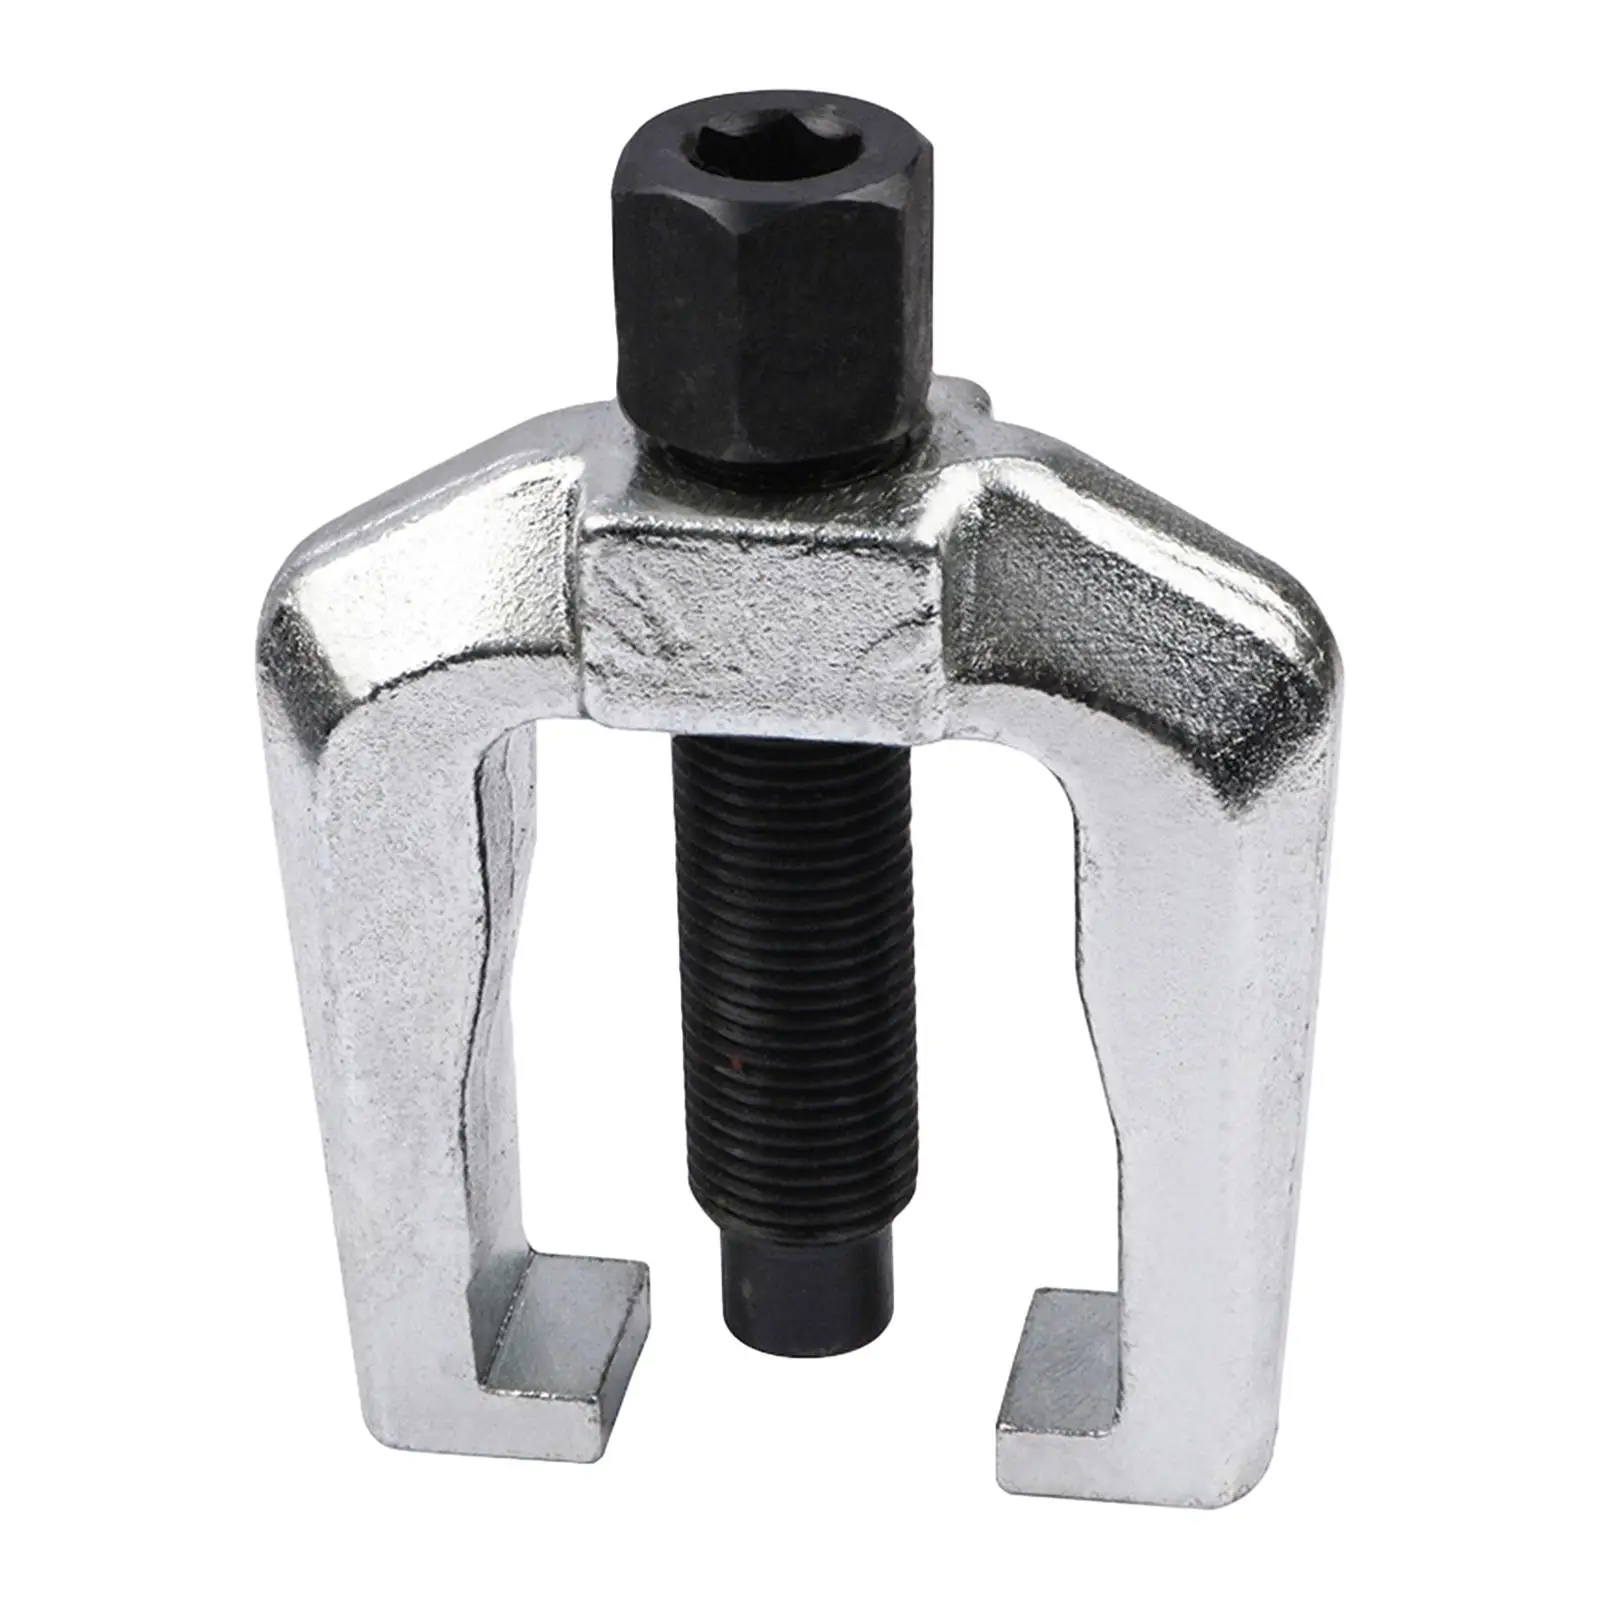 Slack Adjuster Puller Compact Easy to Operate Trucks Works on Automatic Adjusters Metal Sturdy Remover Tool Pulley Puller Tool